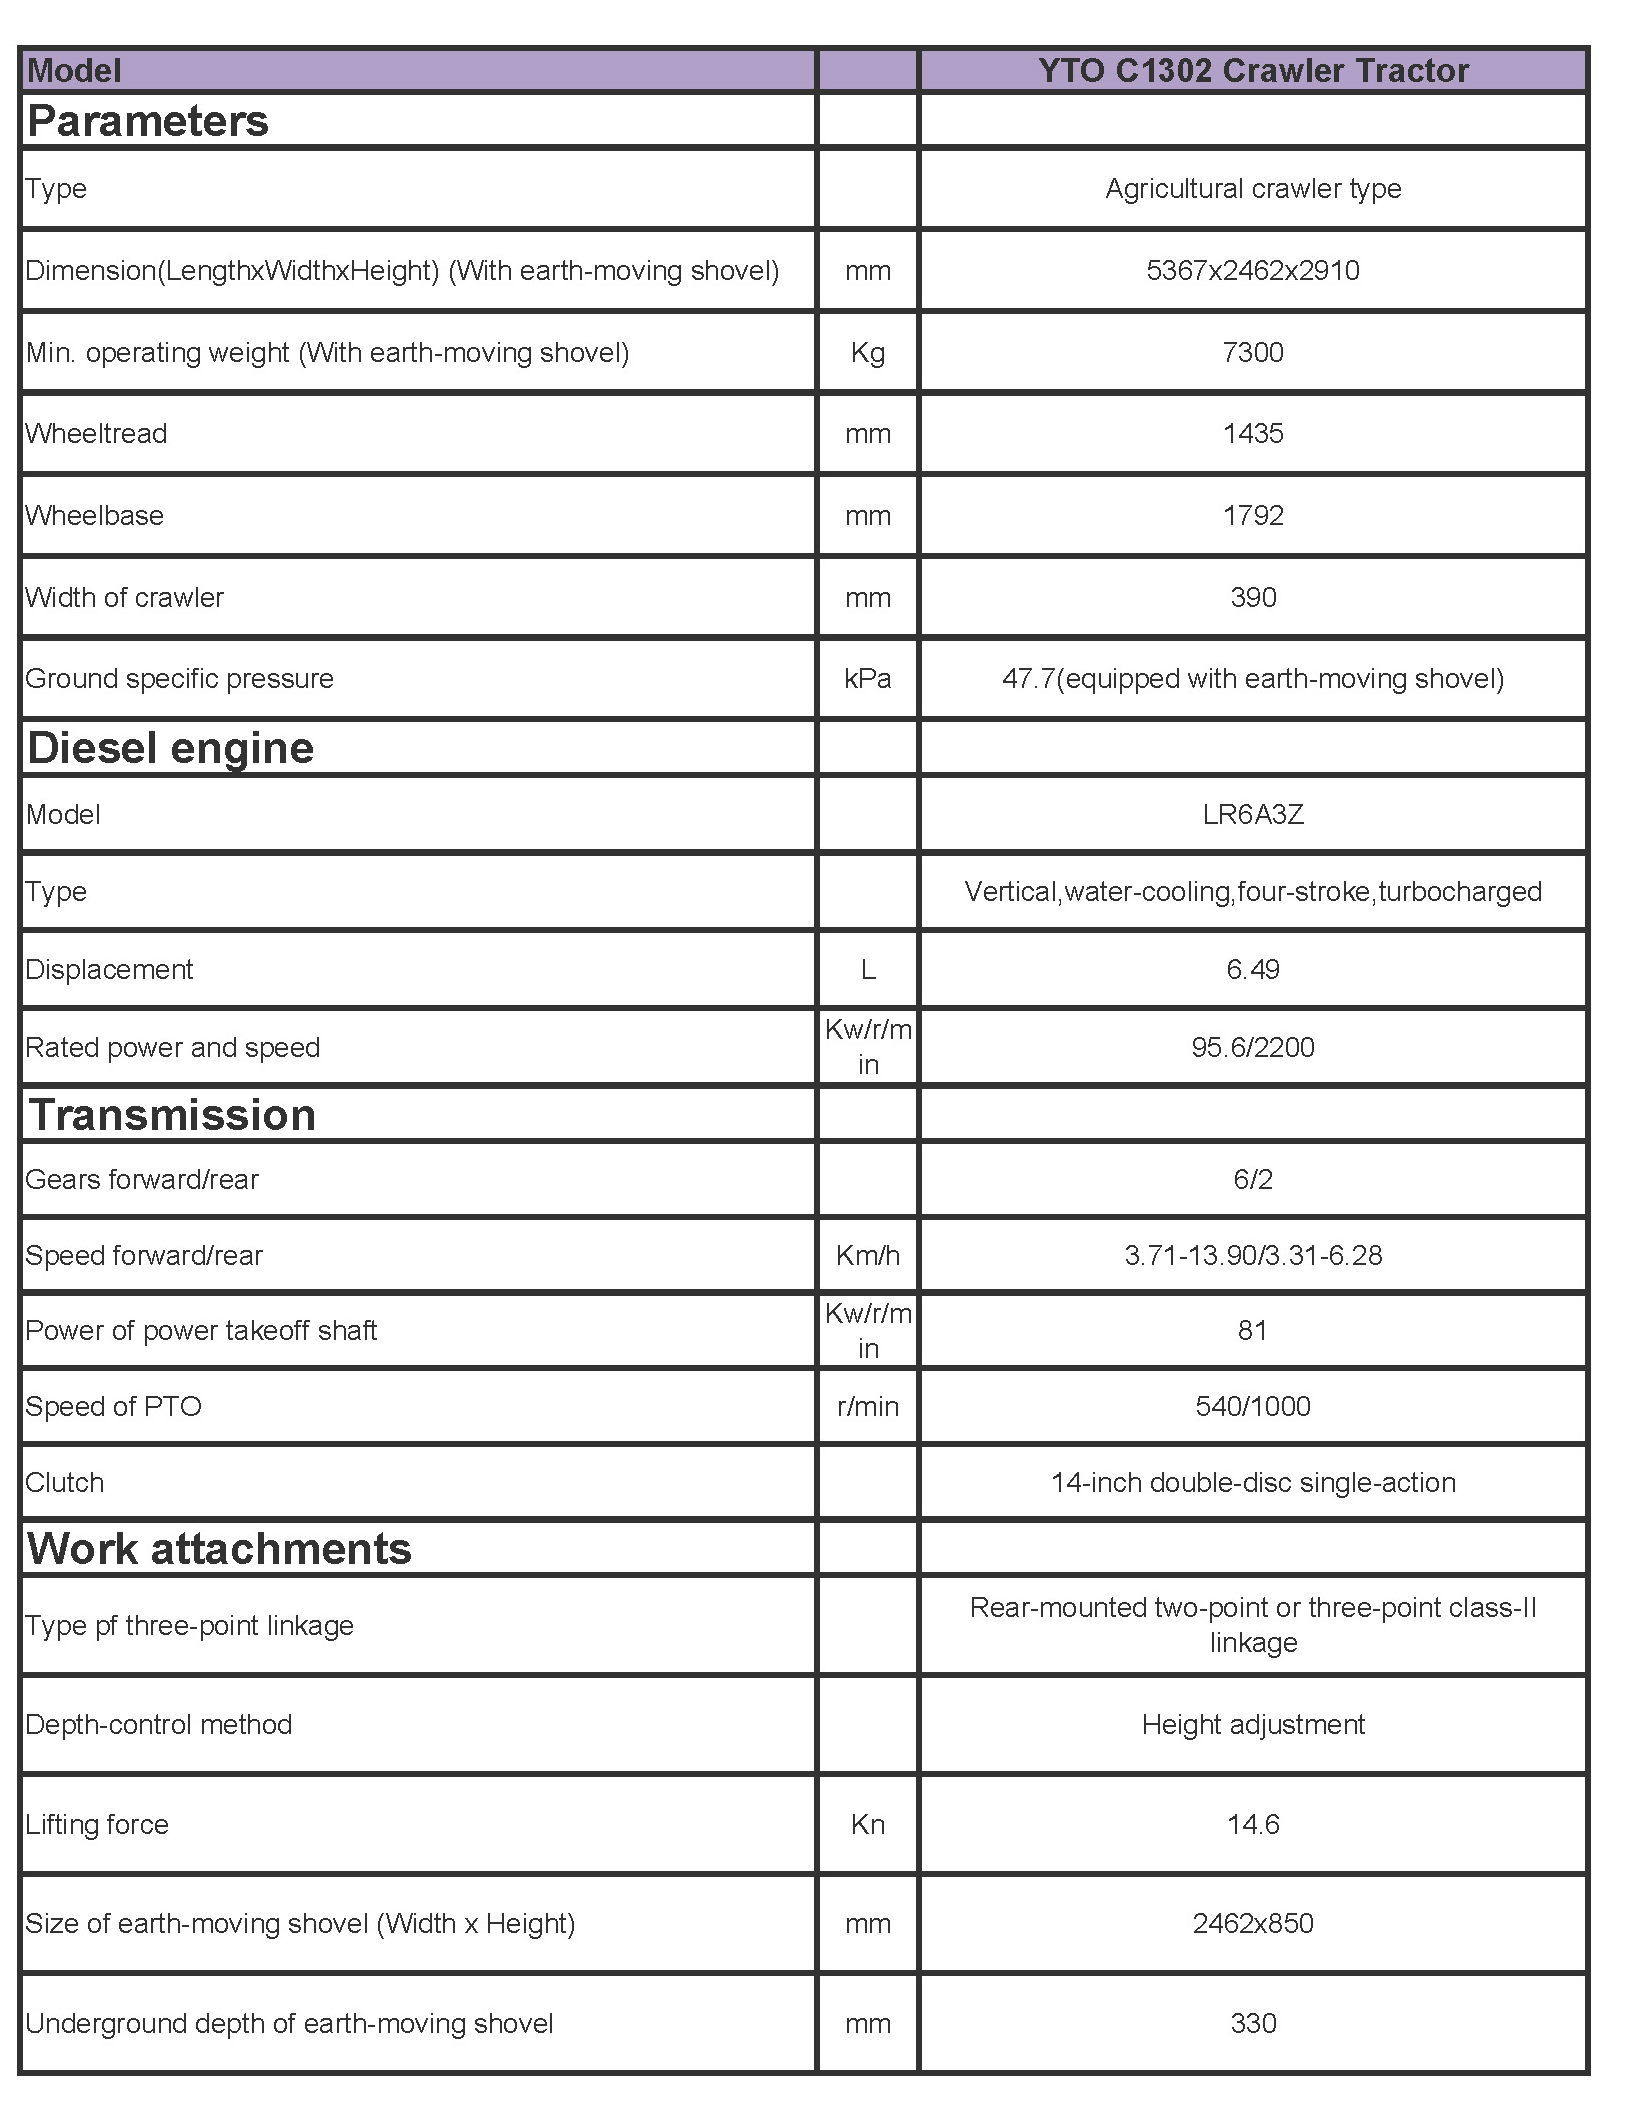 YTO C1302 Crawler Tractor Technical Specification